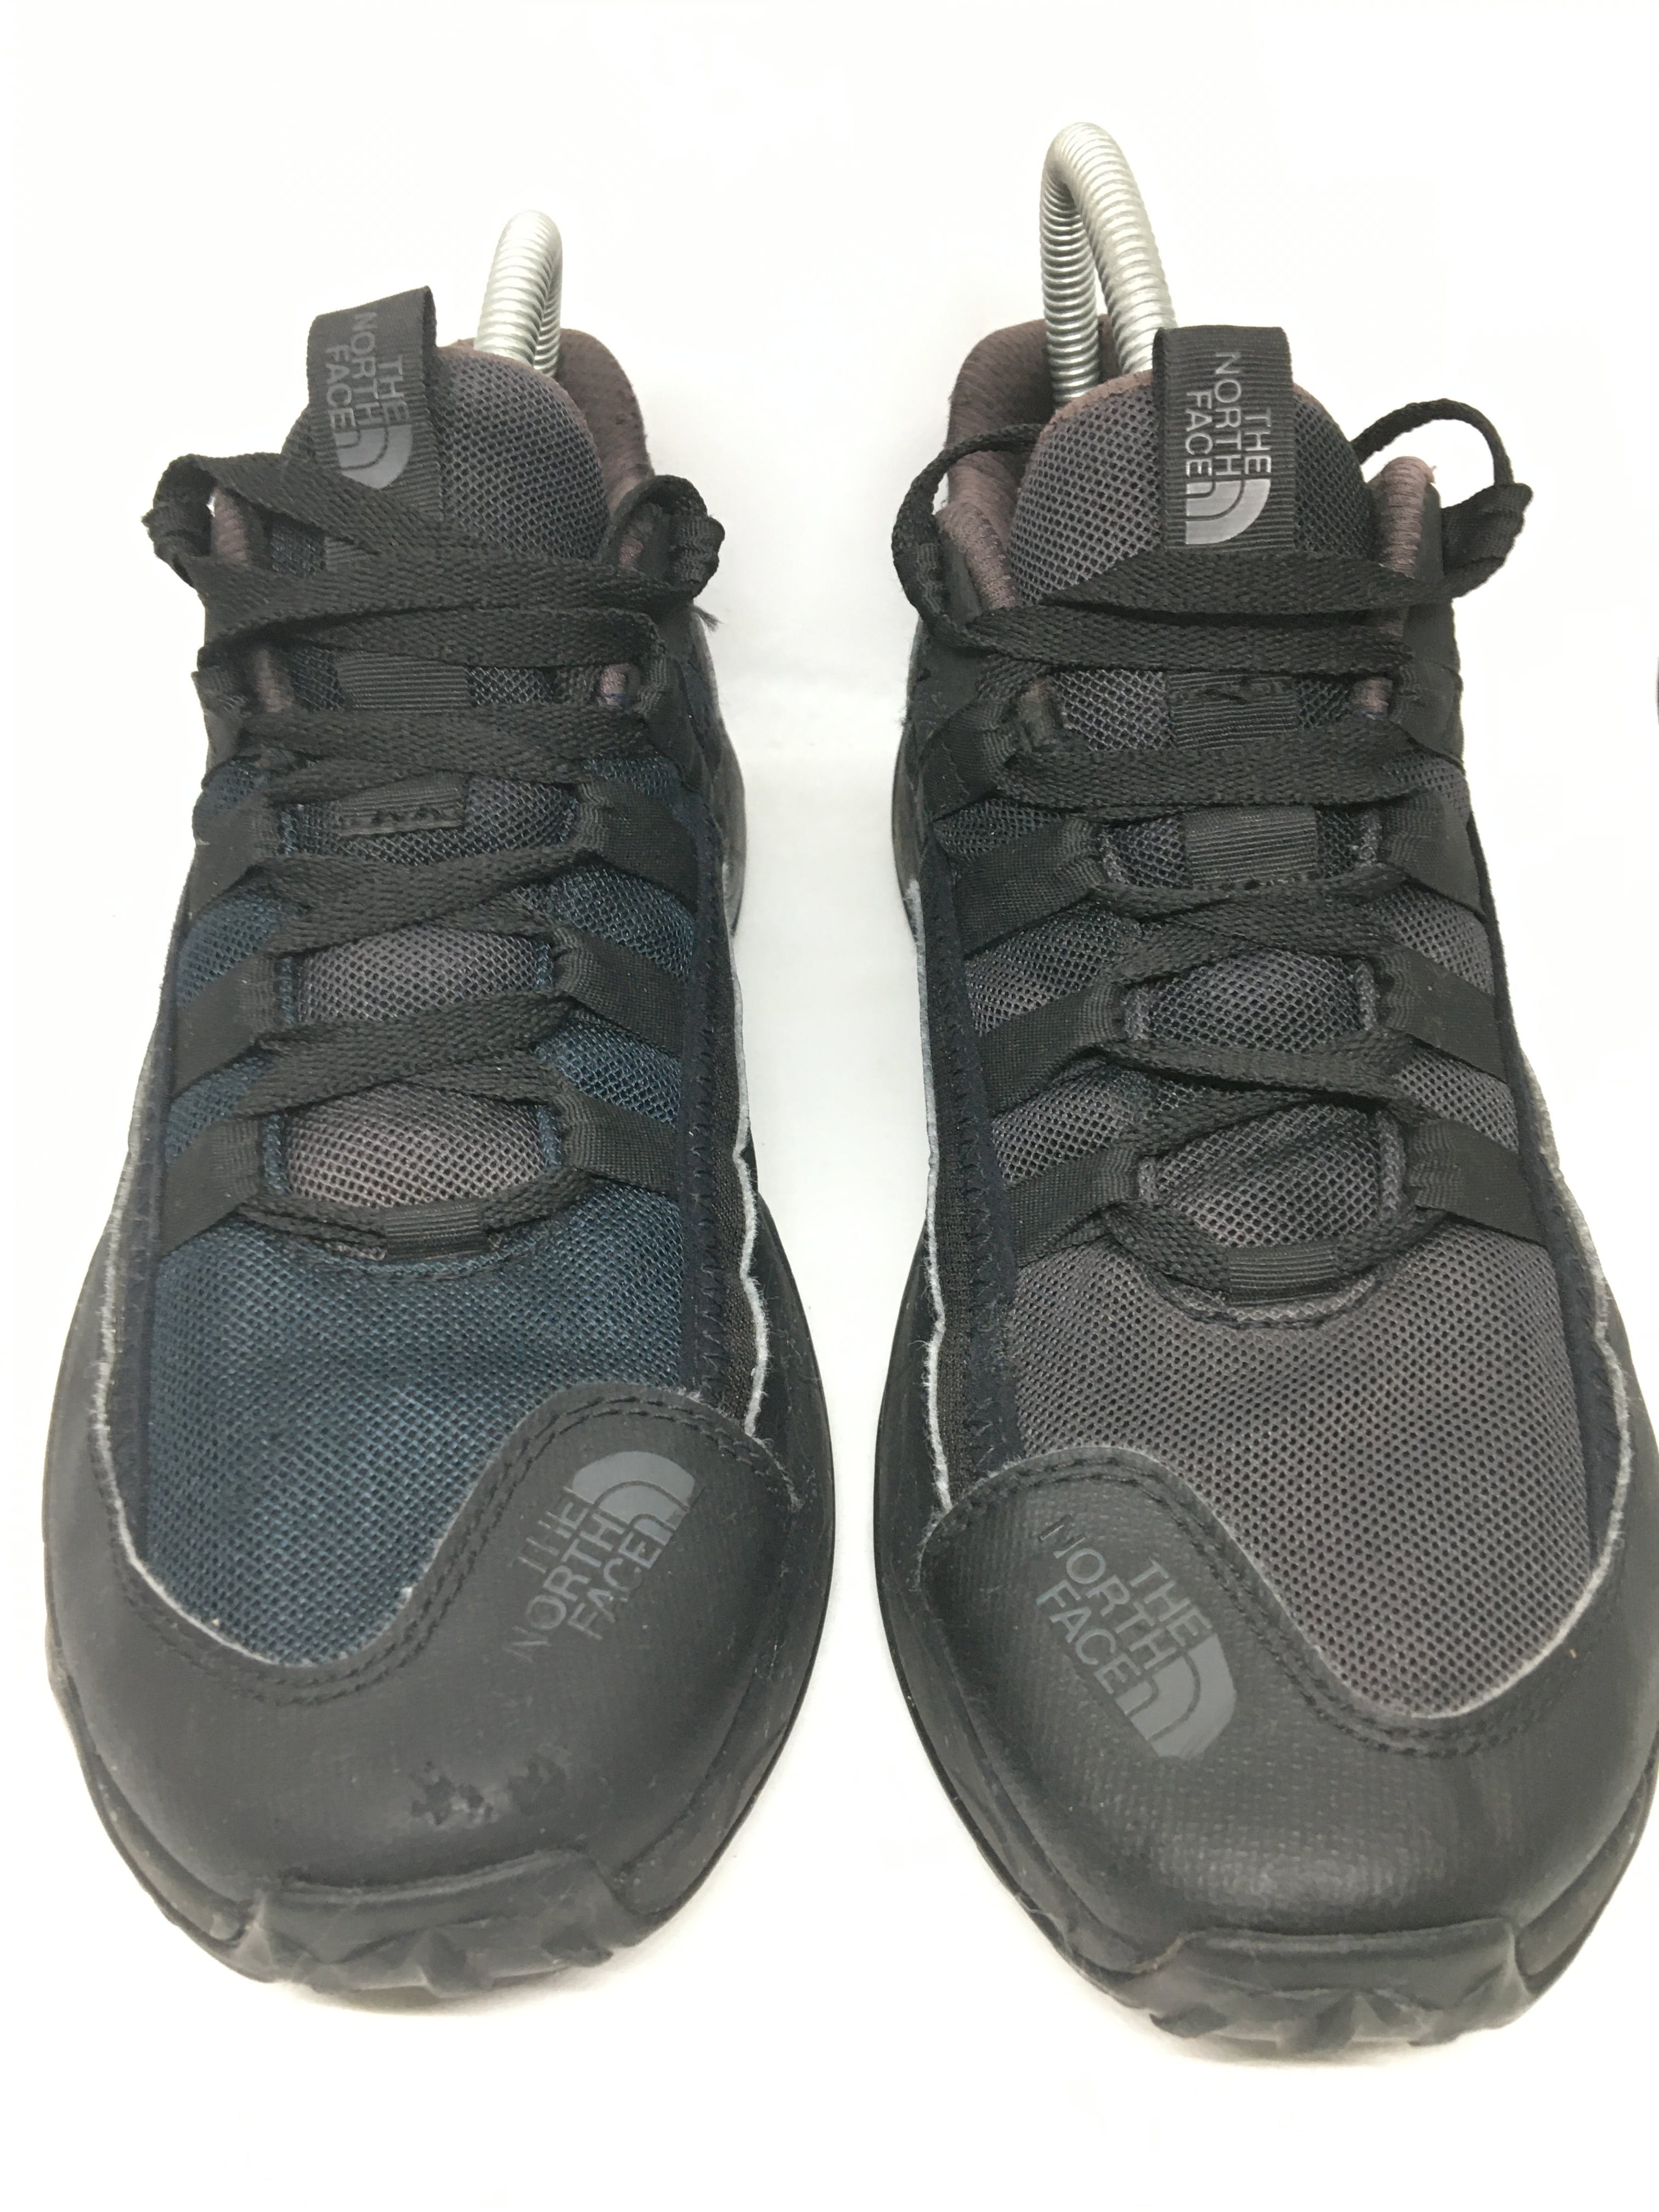 TNF The north face black sneakers size us9 - 2